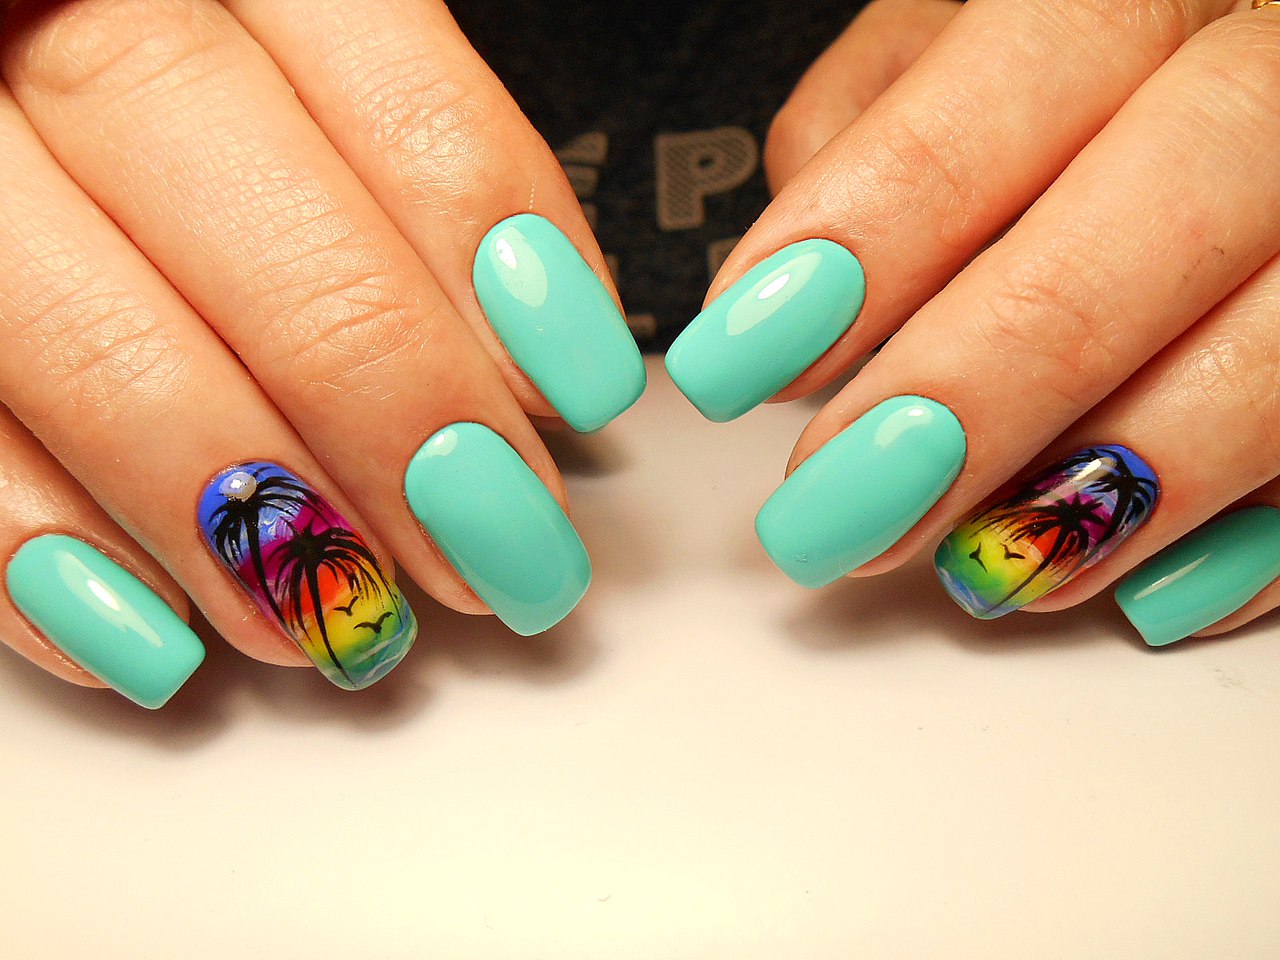 4. Indiana Nails and Art - wide 4